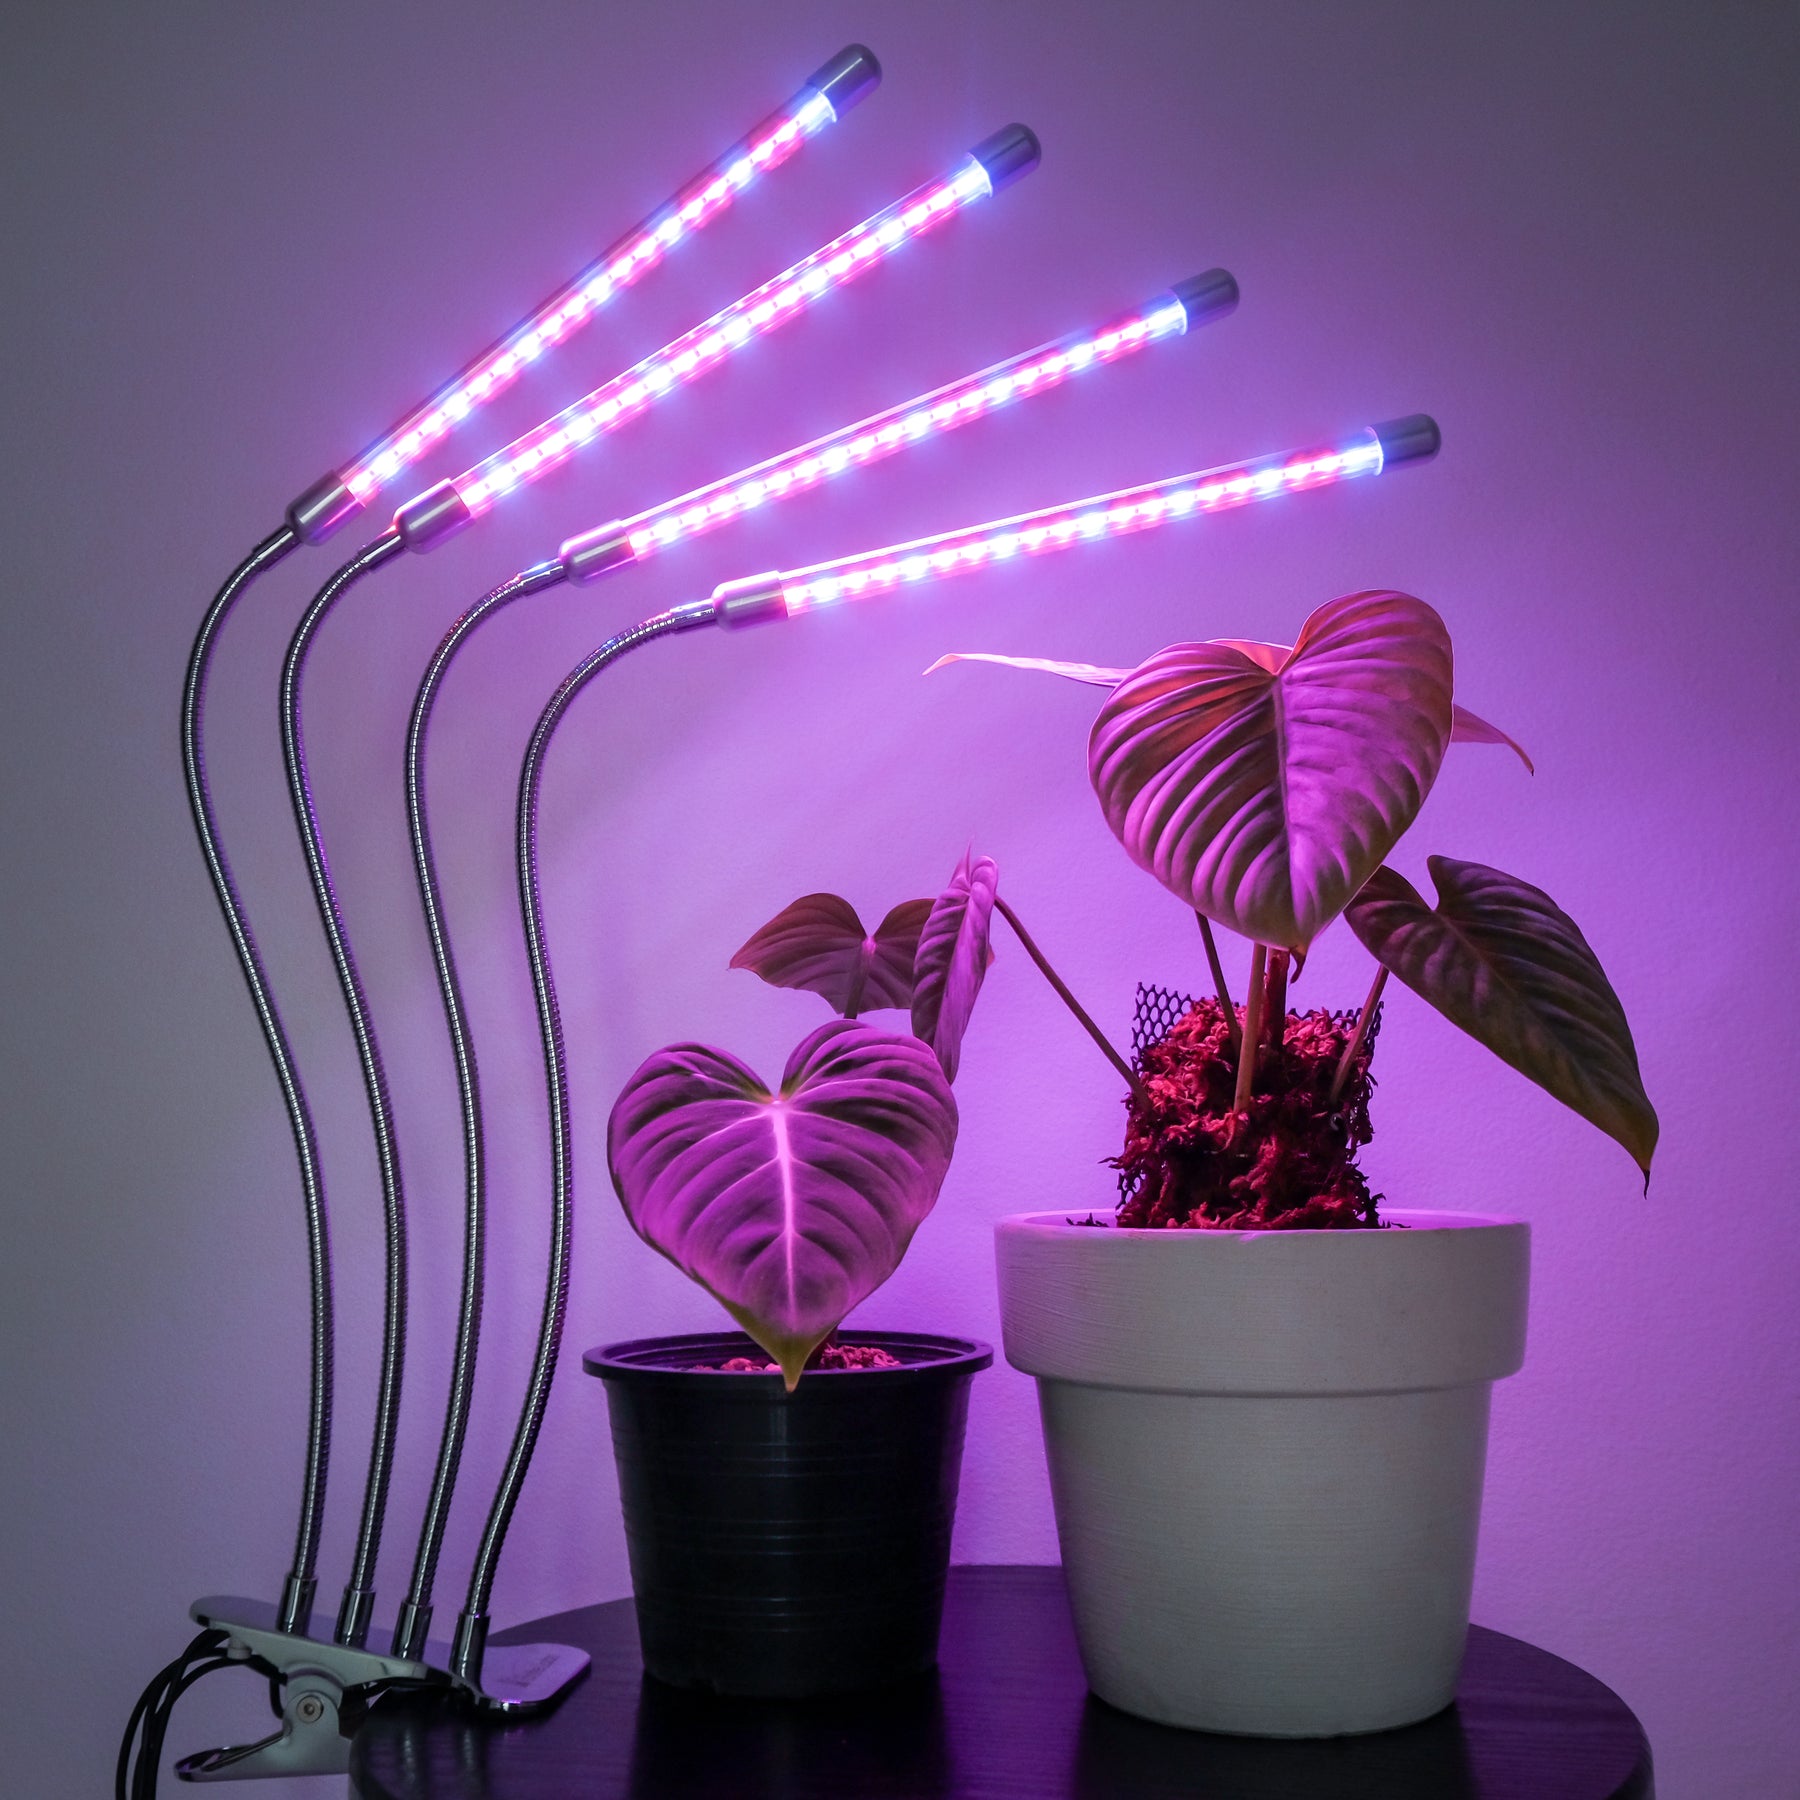 https://brite-labs.com/cdn/shop/products/Brite-Labs-Saber-QUAD-LED-Grow-Lights-For-Indoor-Plants-Small-Artificial-Sunlight-Plant-Growing-Lamp-Full-Spectrum-Bulbs-Seed-Starting-Kit-JOMN4550_1800x1800.jpg?v=1620811341